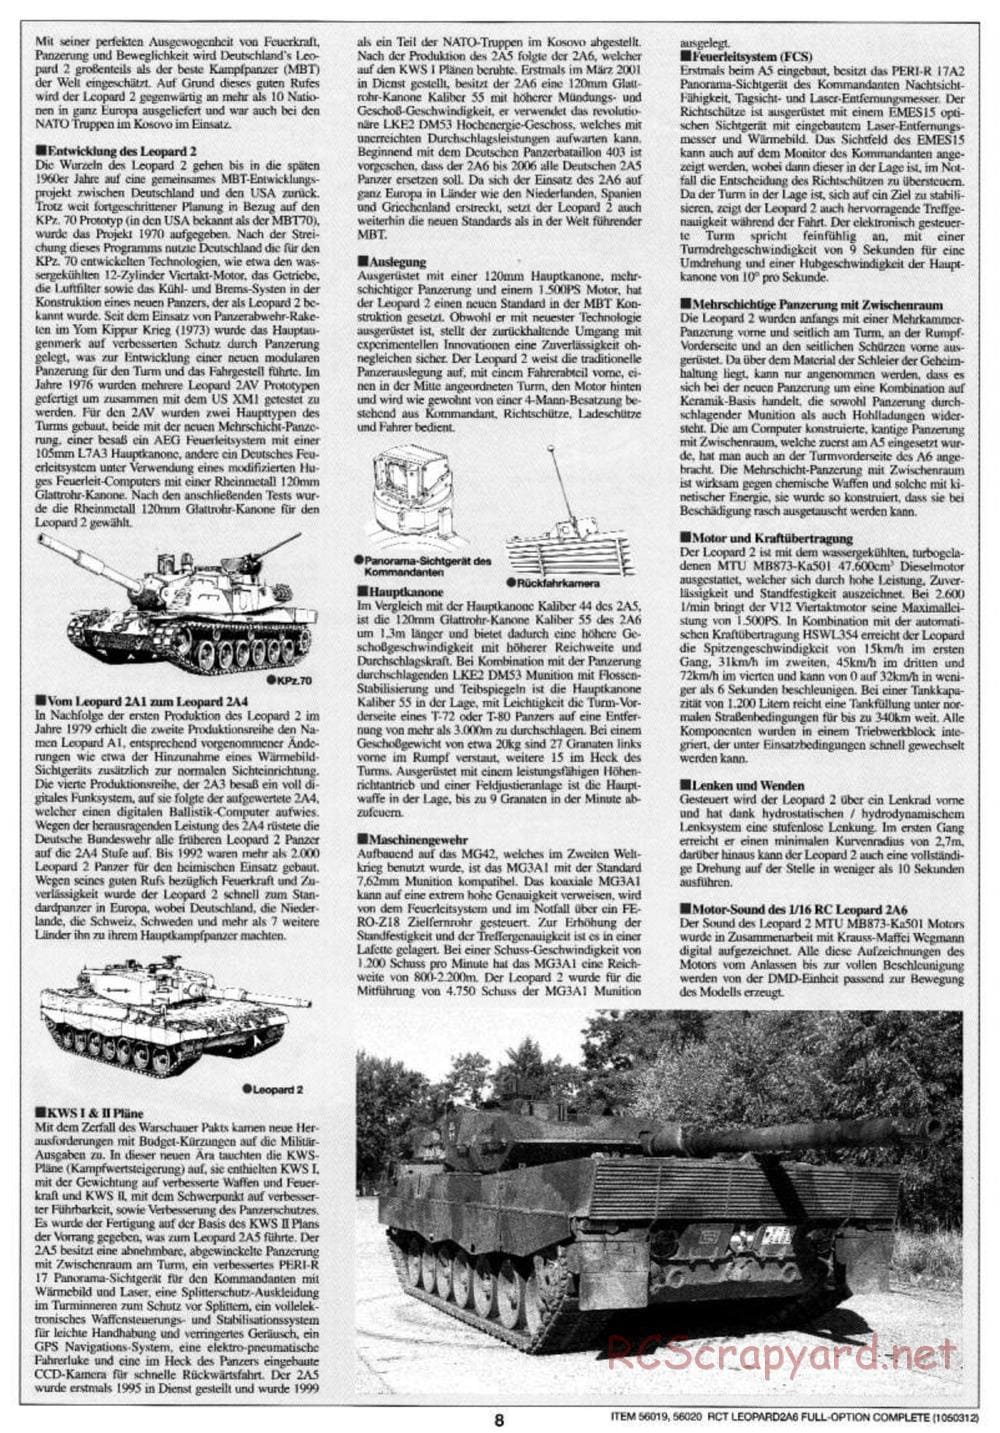 Tamiya - Leopard 2 A6 - 1/16 Scale Chassis - Manual - Page 8